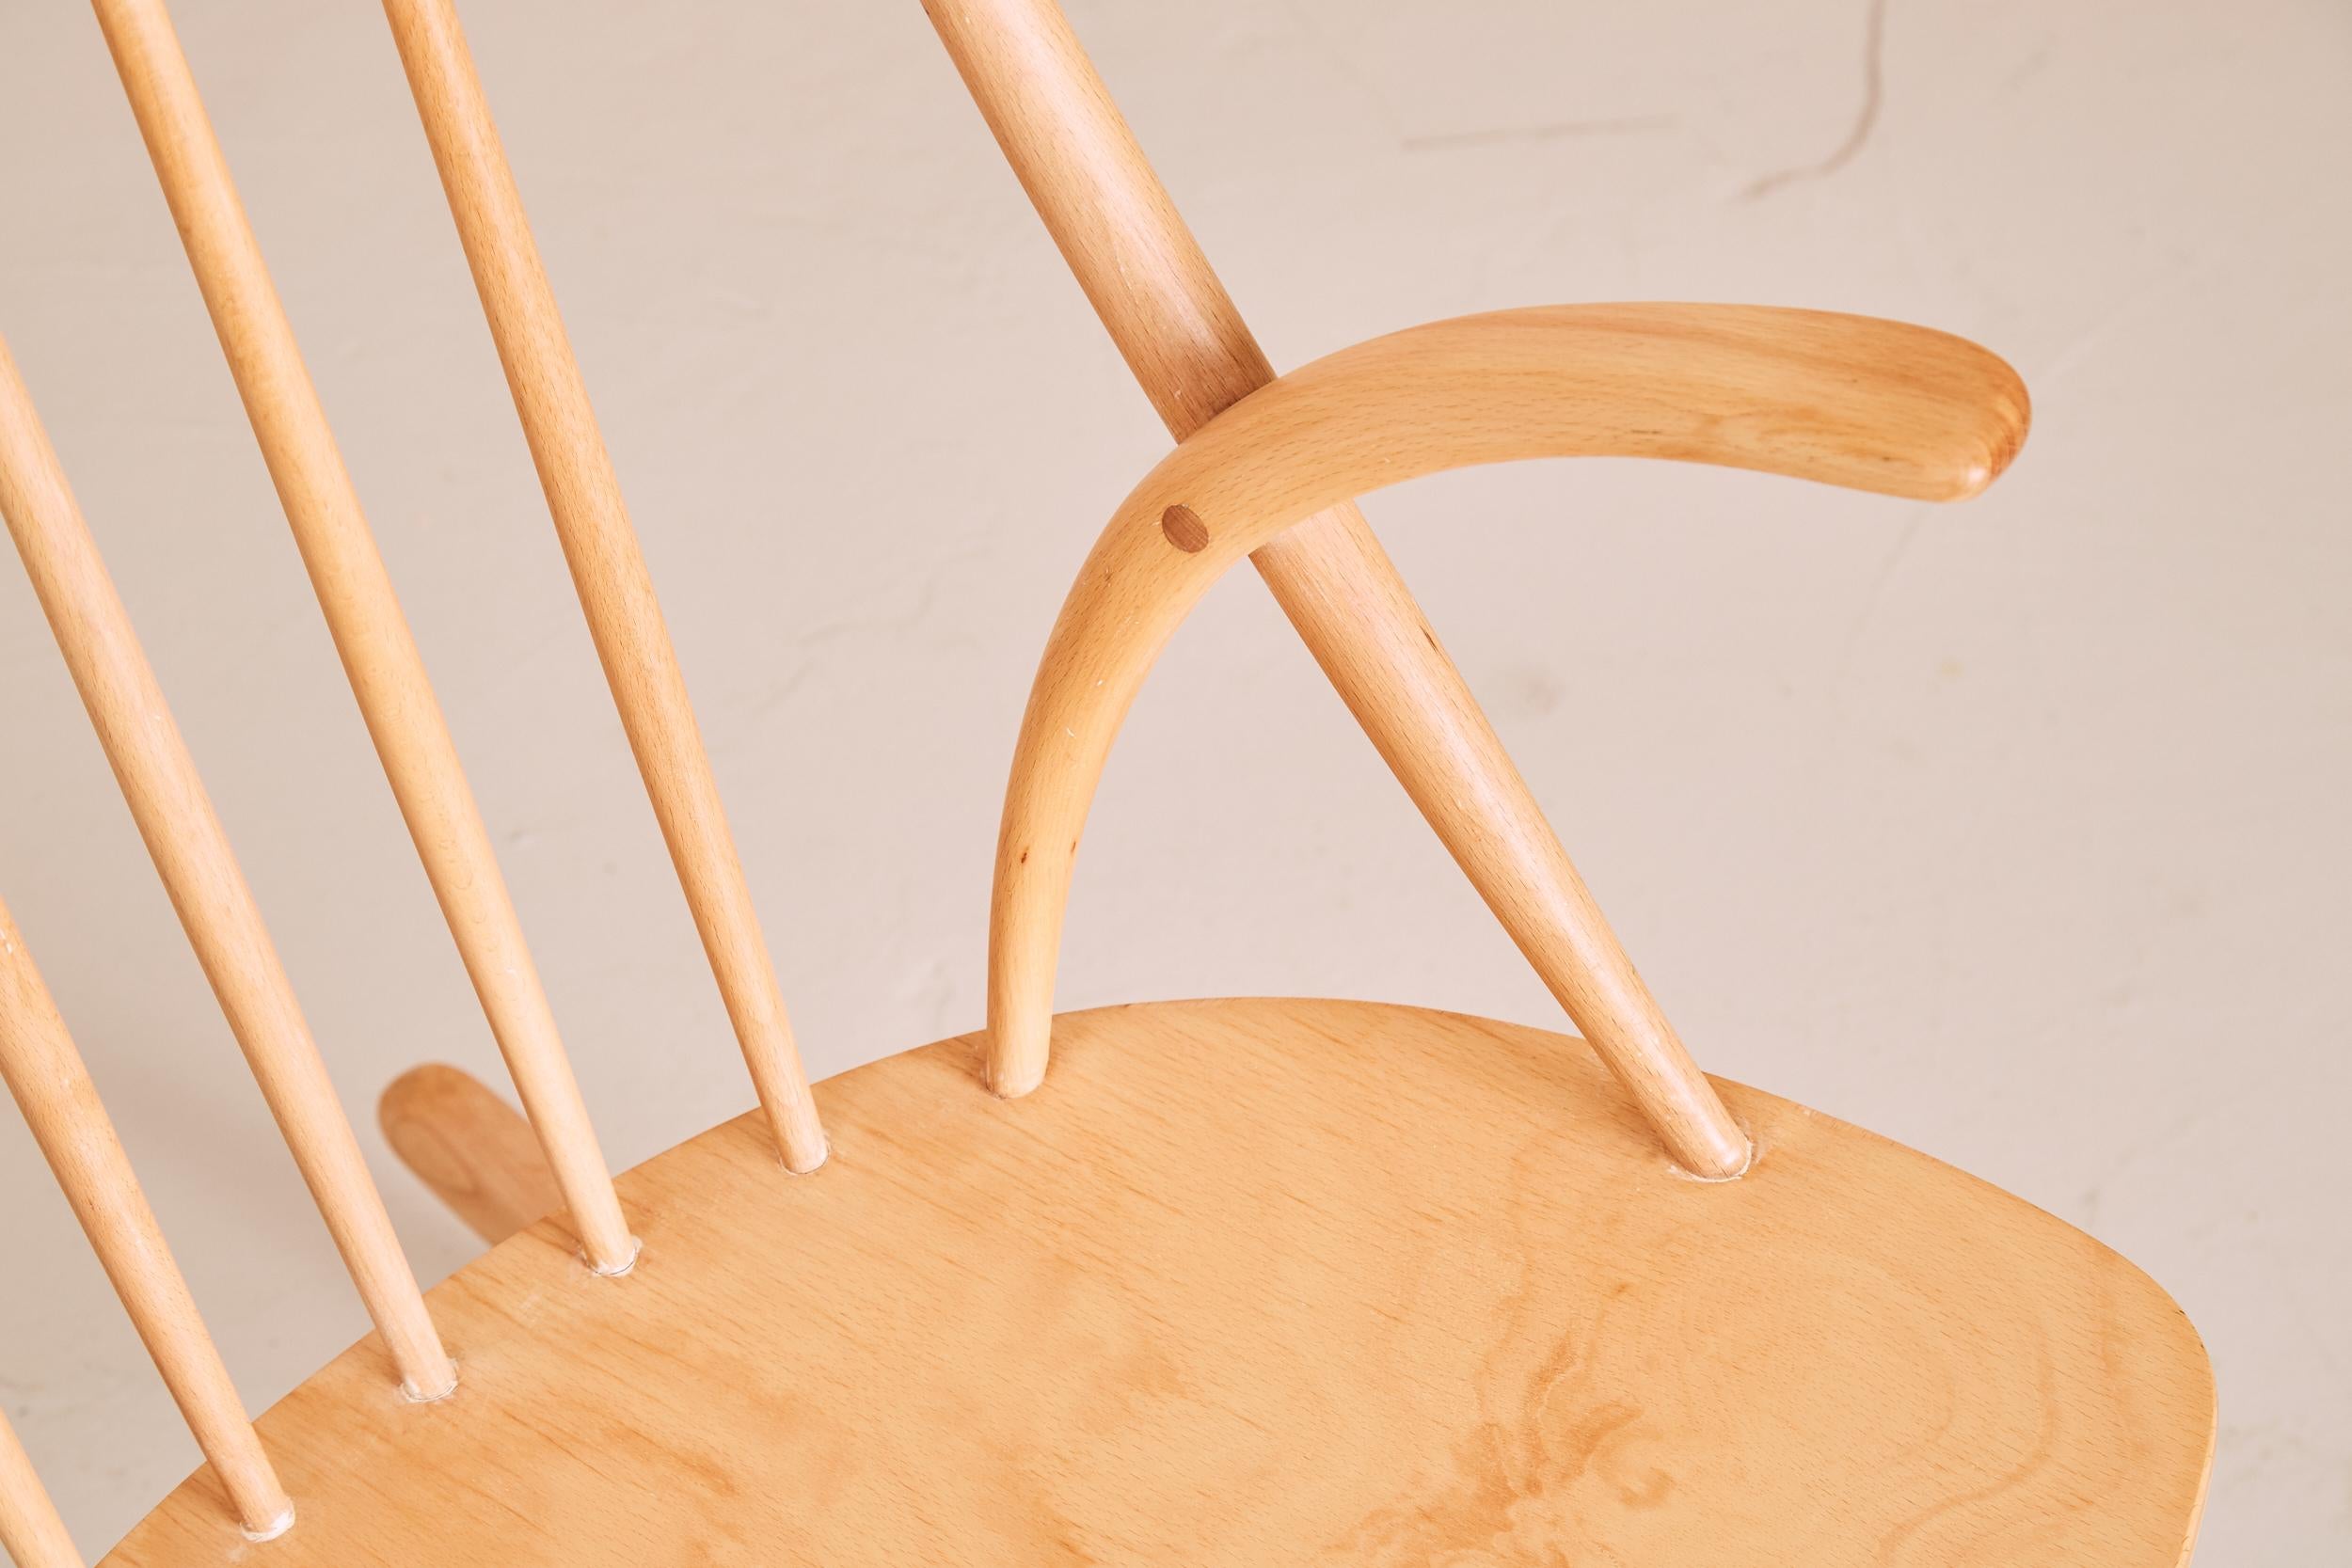 One of the most iconic rocking chairs produced during the Danish mid century furniture period, the IW3 is ergonomically designed and constructed in a beech with beautiful grain. Wikkelsø’s aesthetic is considered quintessentially Scandinavian,